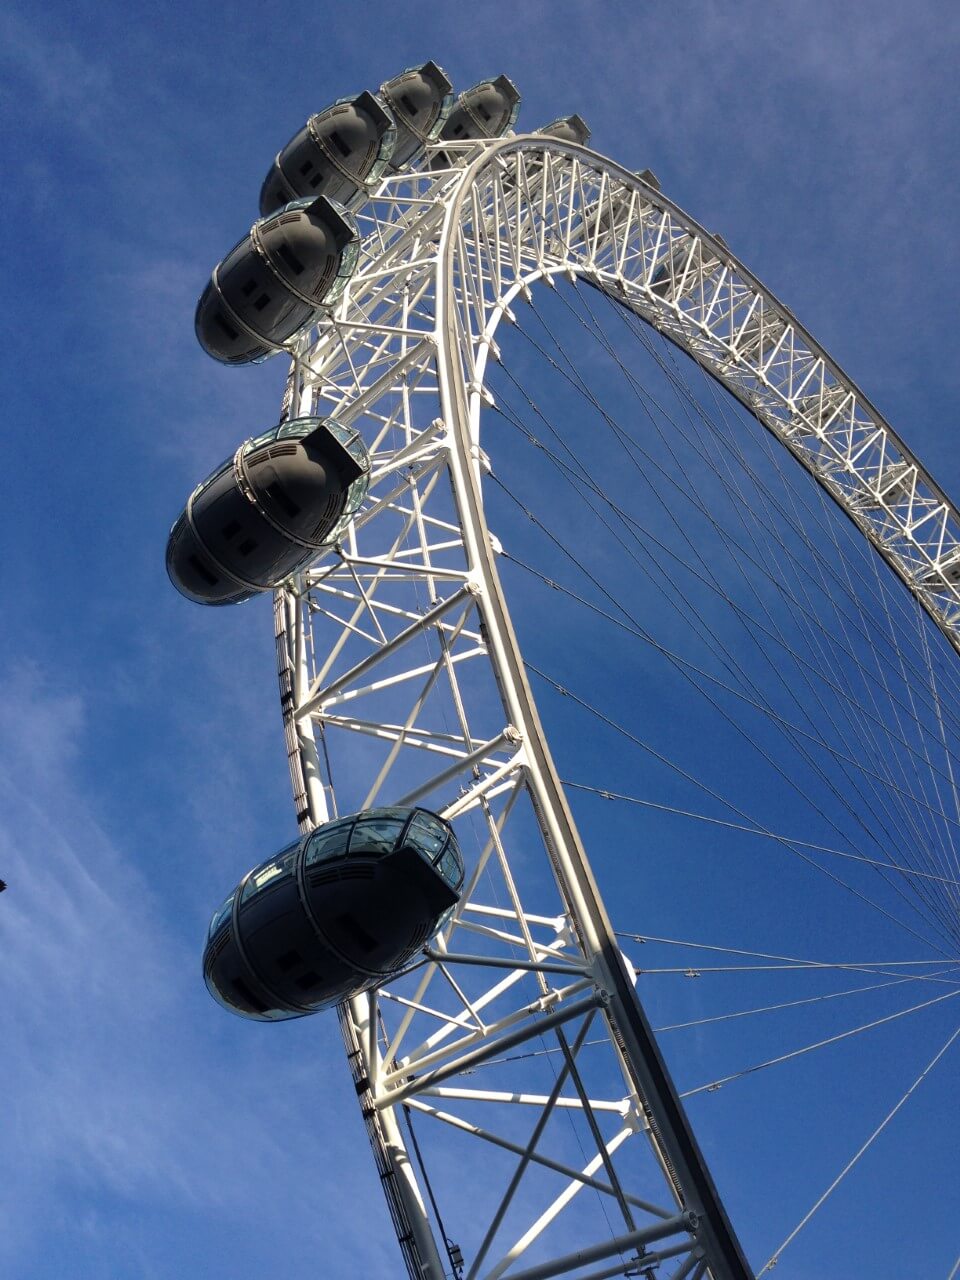 looking up at the pods on the London eye